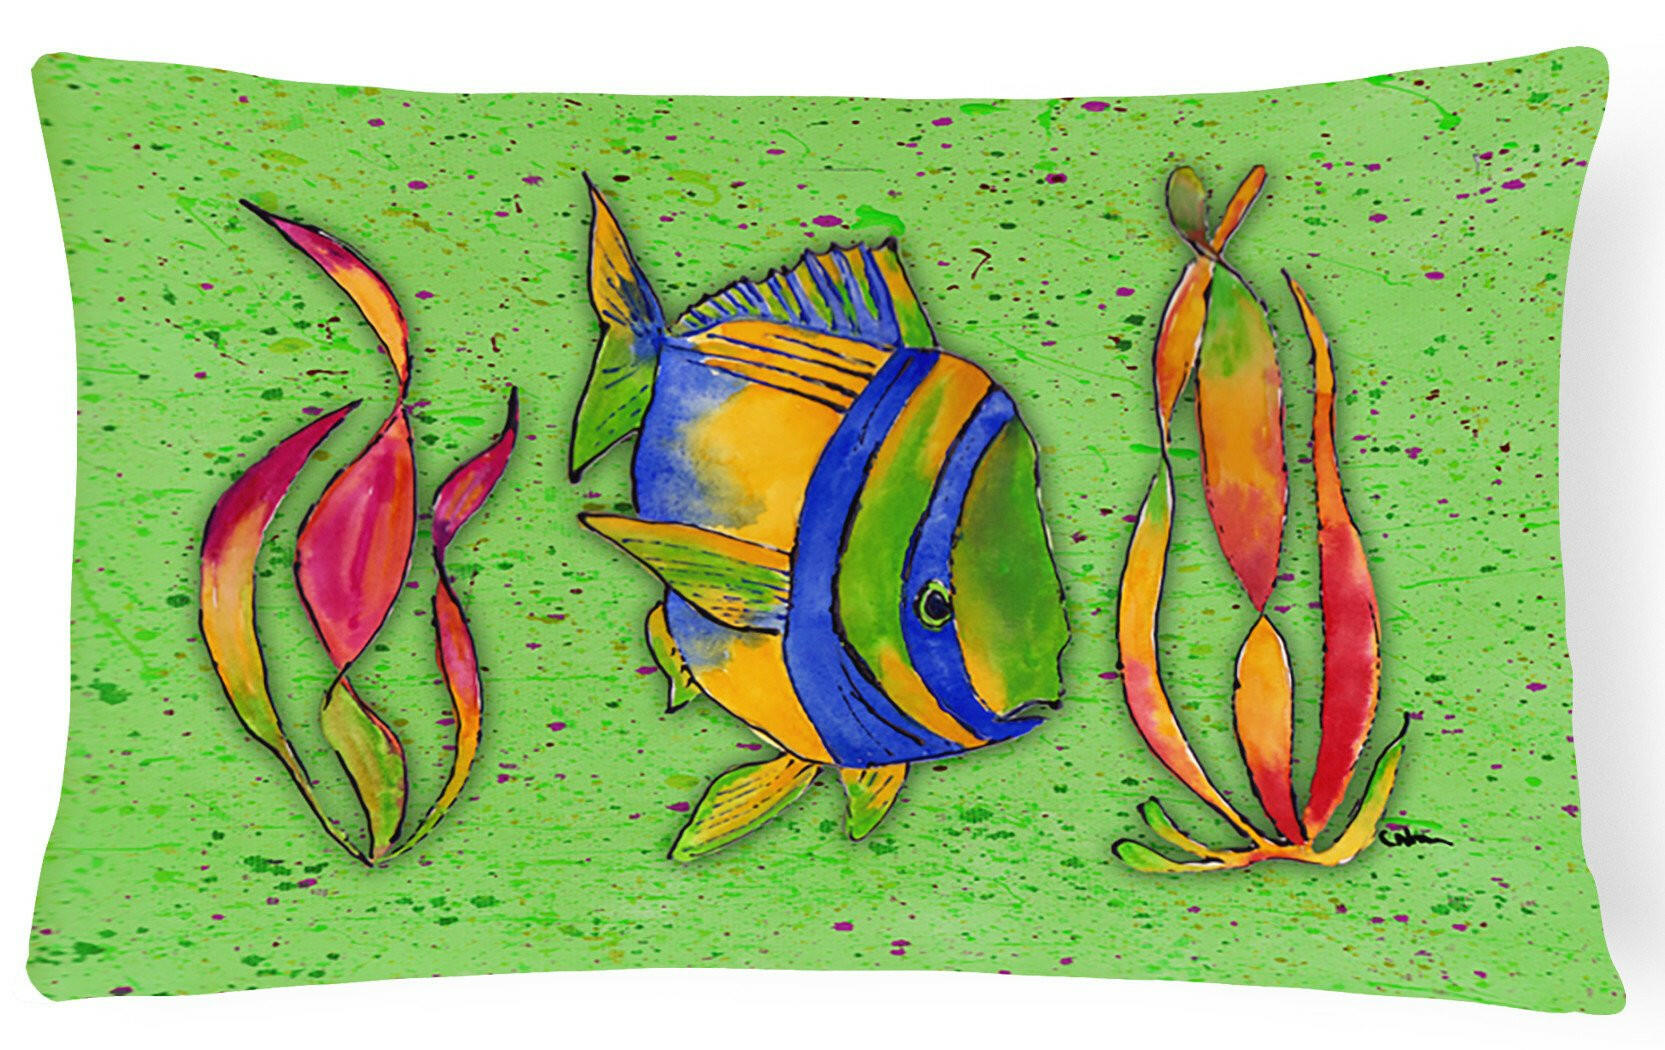 Tropical Fish on Green   Canvas Fabric Decorative Pillow by Caroline's Treasures